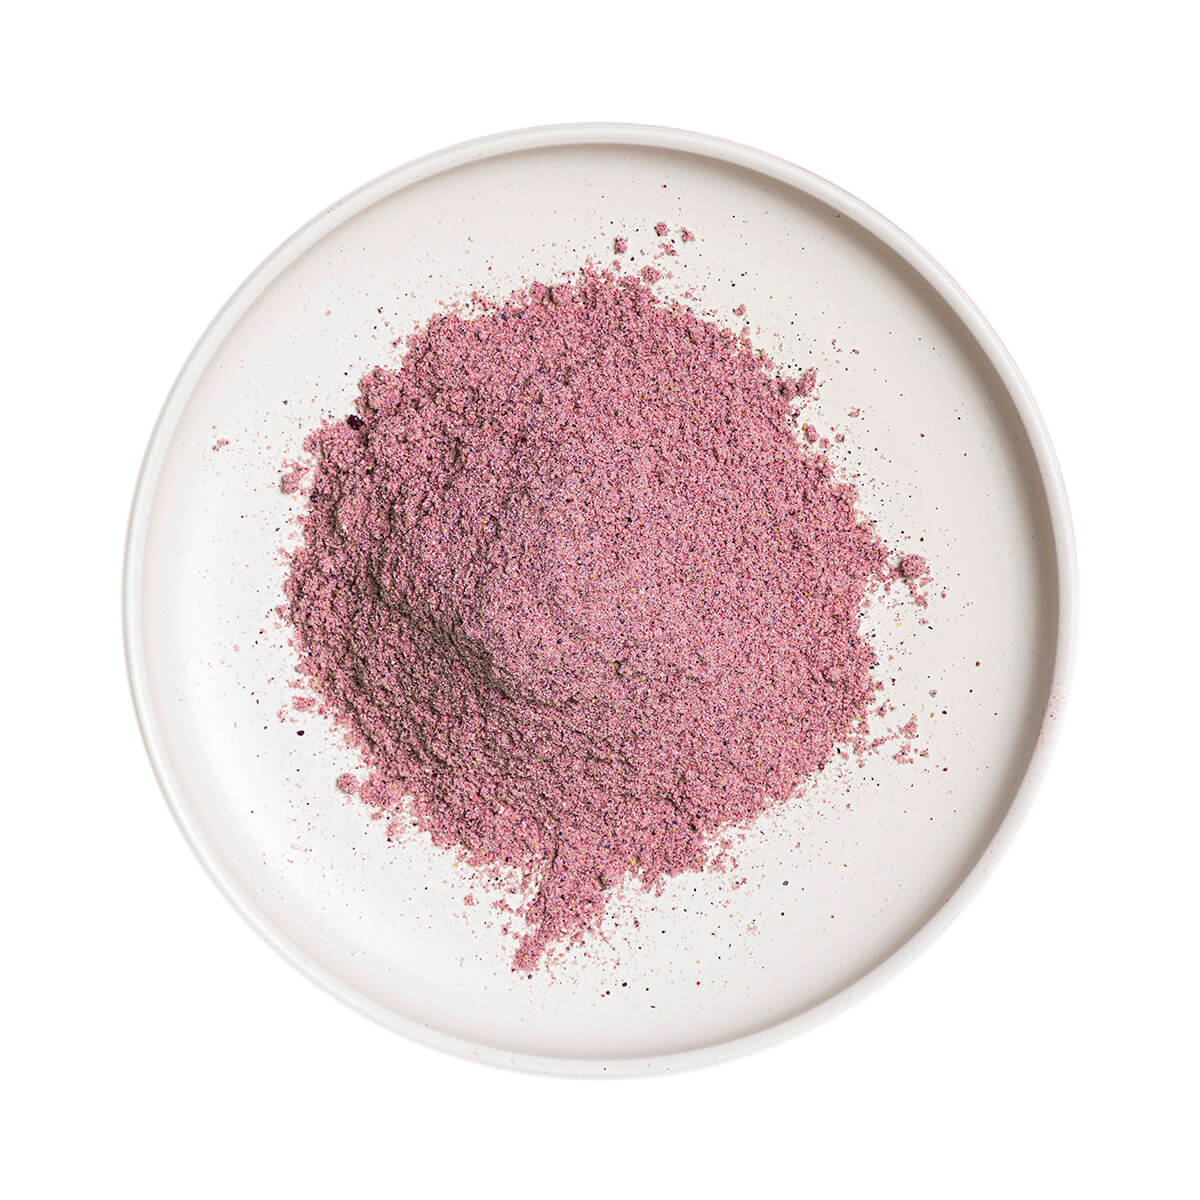 Freeze-Dried Blueberry Powder For Smoothies and Baking